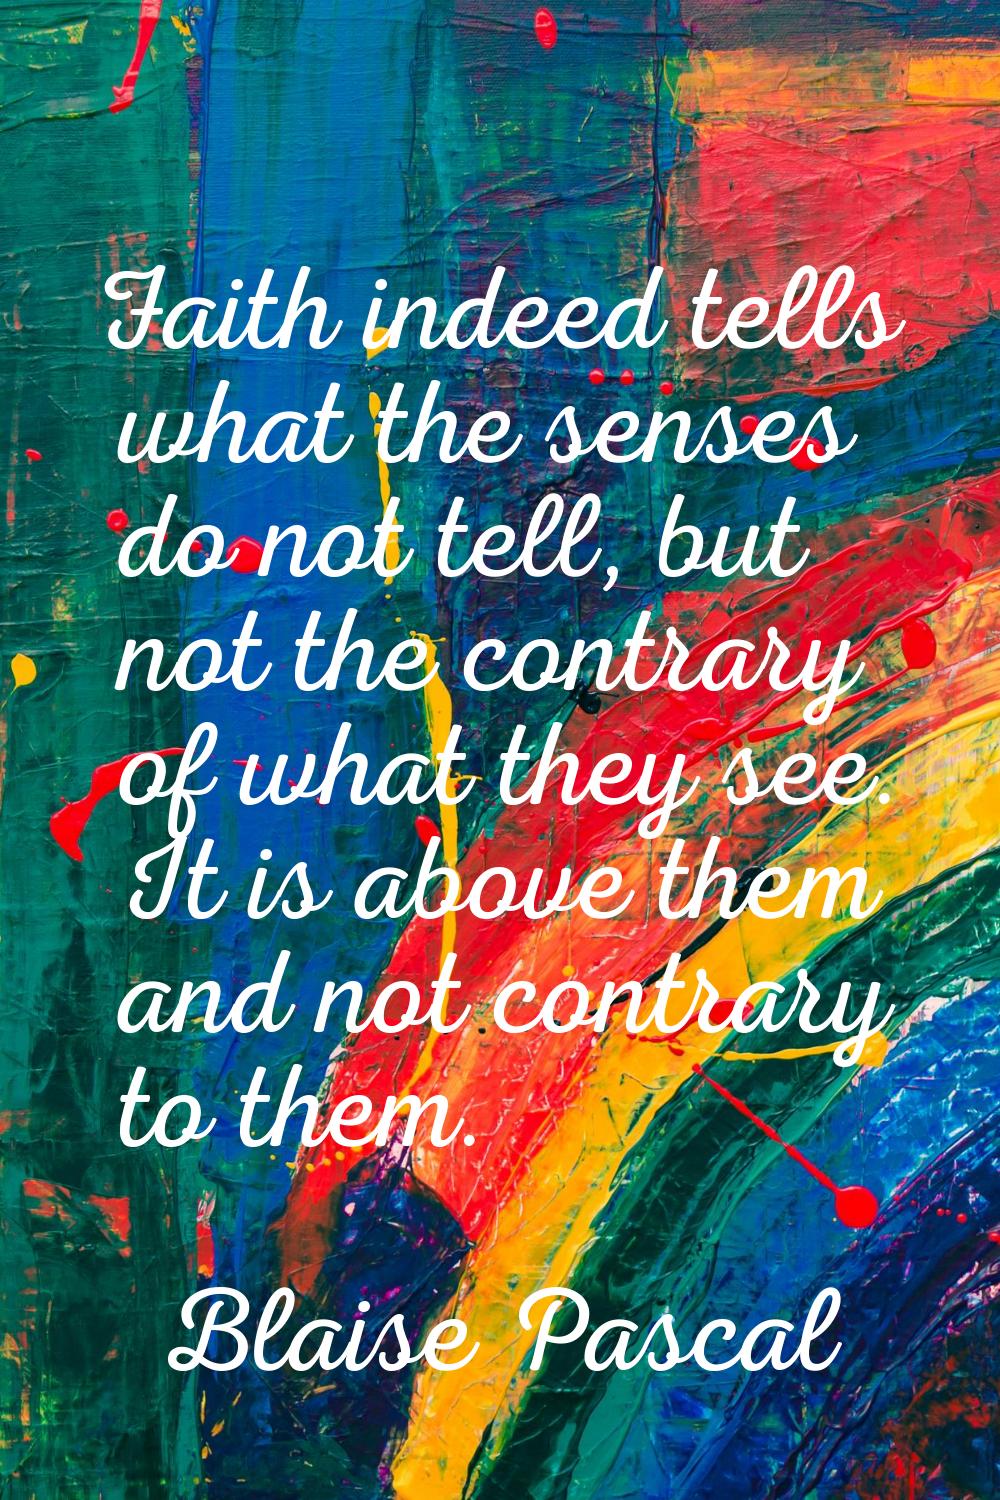 Faith indeed tells what the senses do not tell, but not the contrary of what they see. It is above 